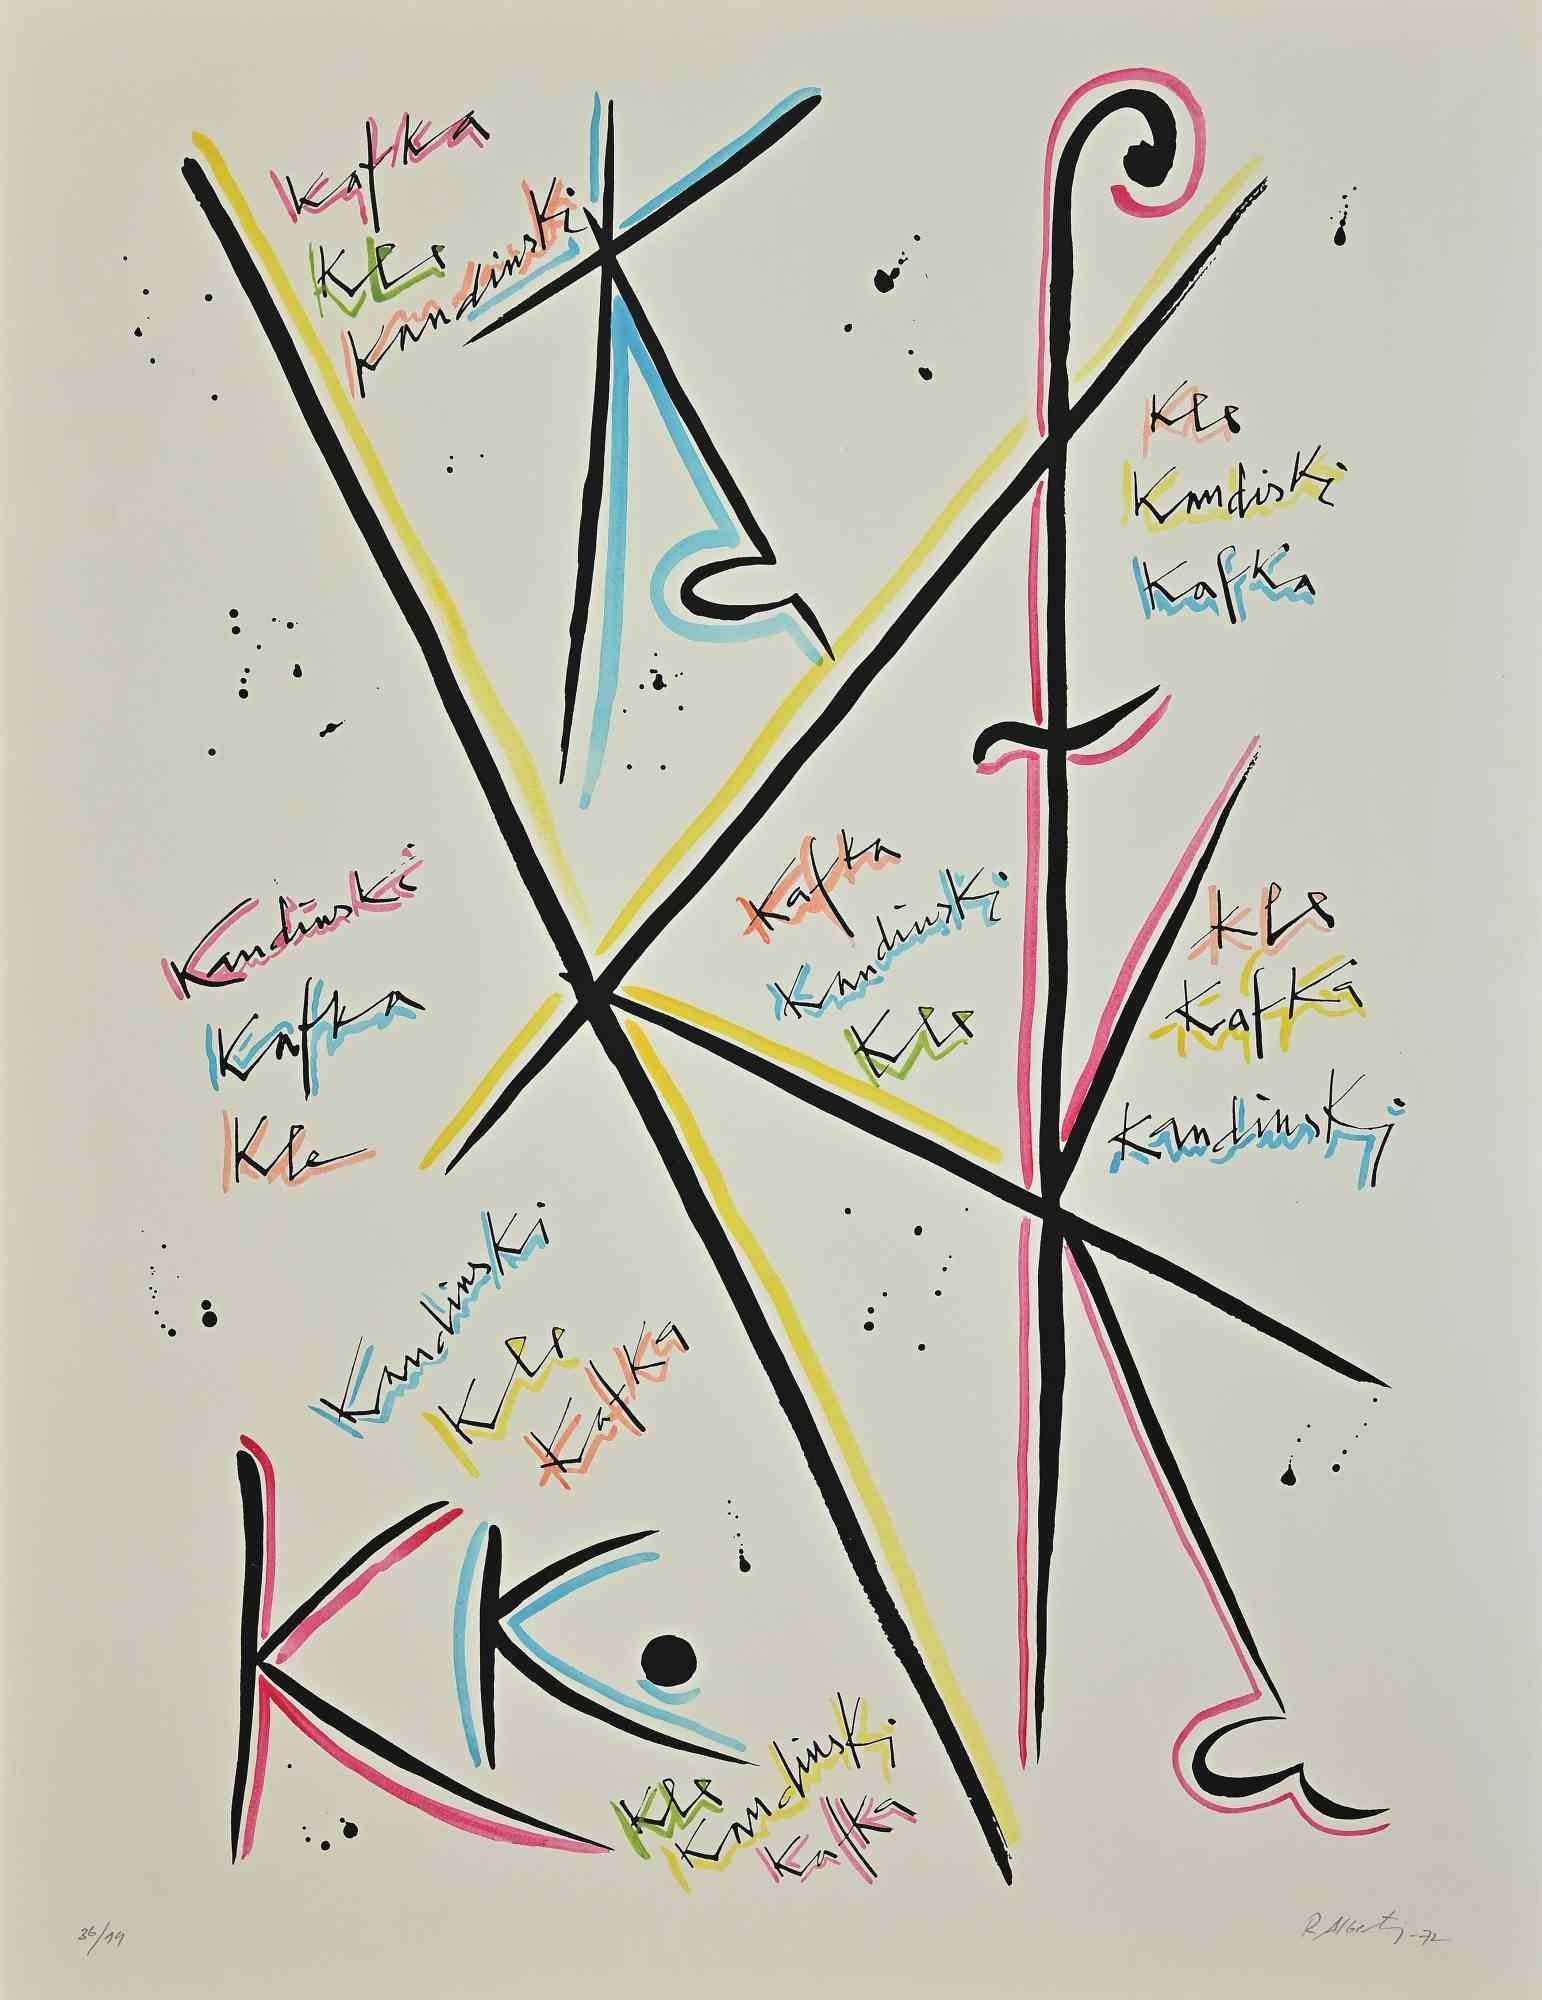 Letter K from the Alphabet series is a lithograph realized by Rafael Alberti in 1972.

Hand-signed on the lower right.

Numbered, 36/99.

The state of preservation is good.

The artwork represents the alphabet letter, with a poetical abstract